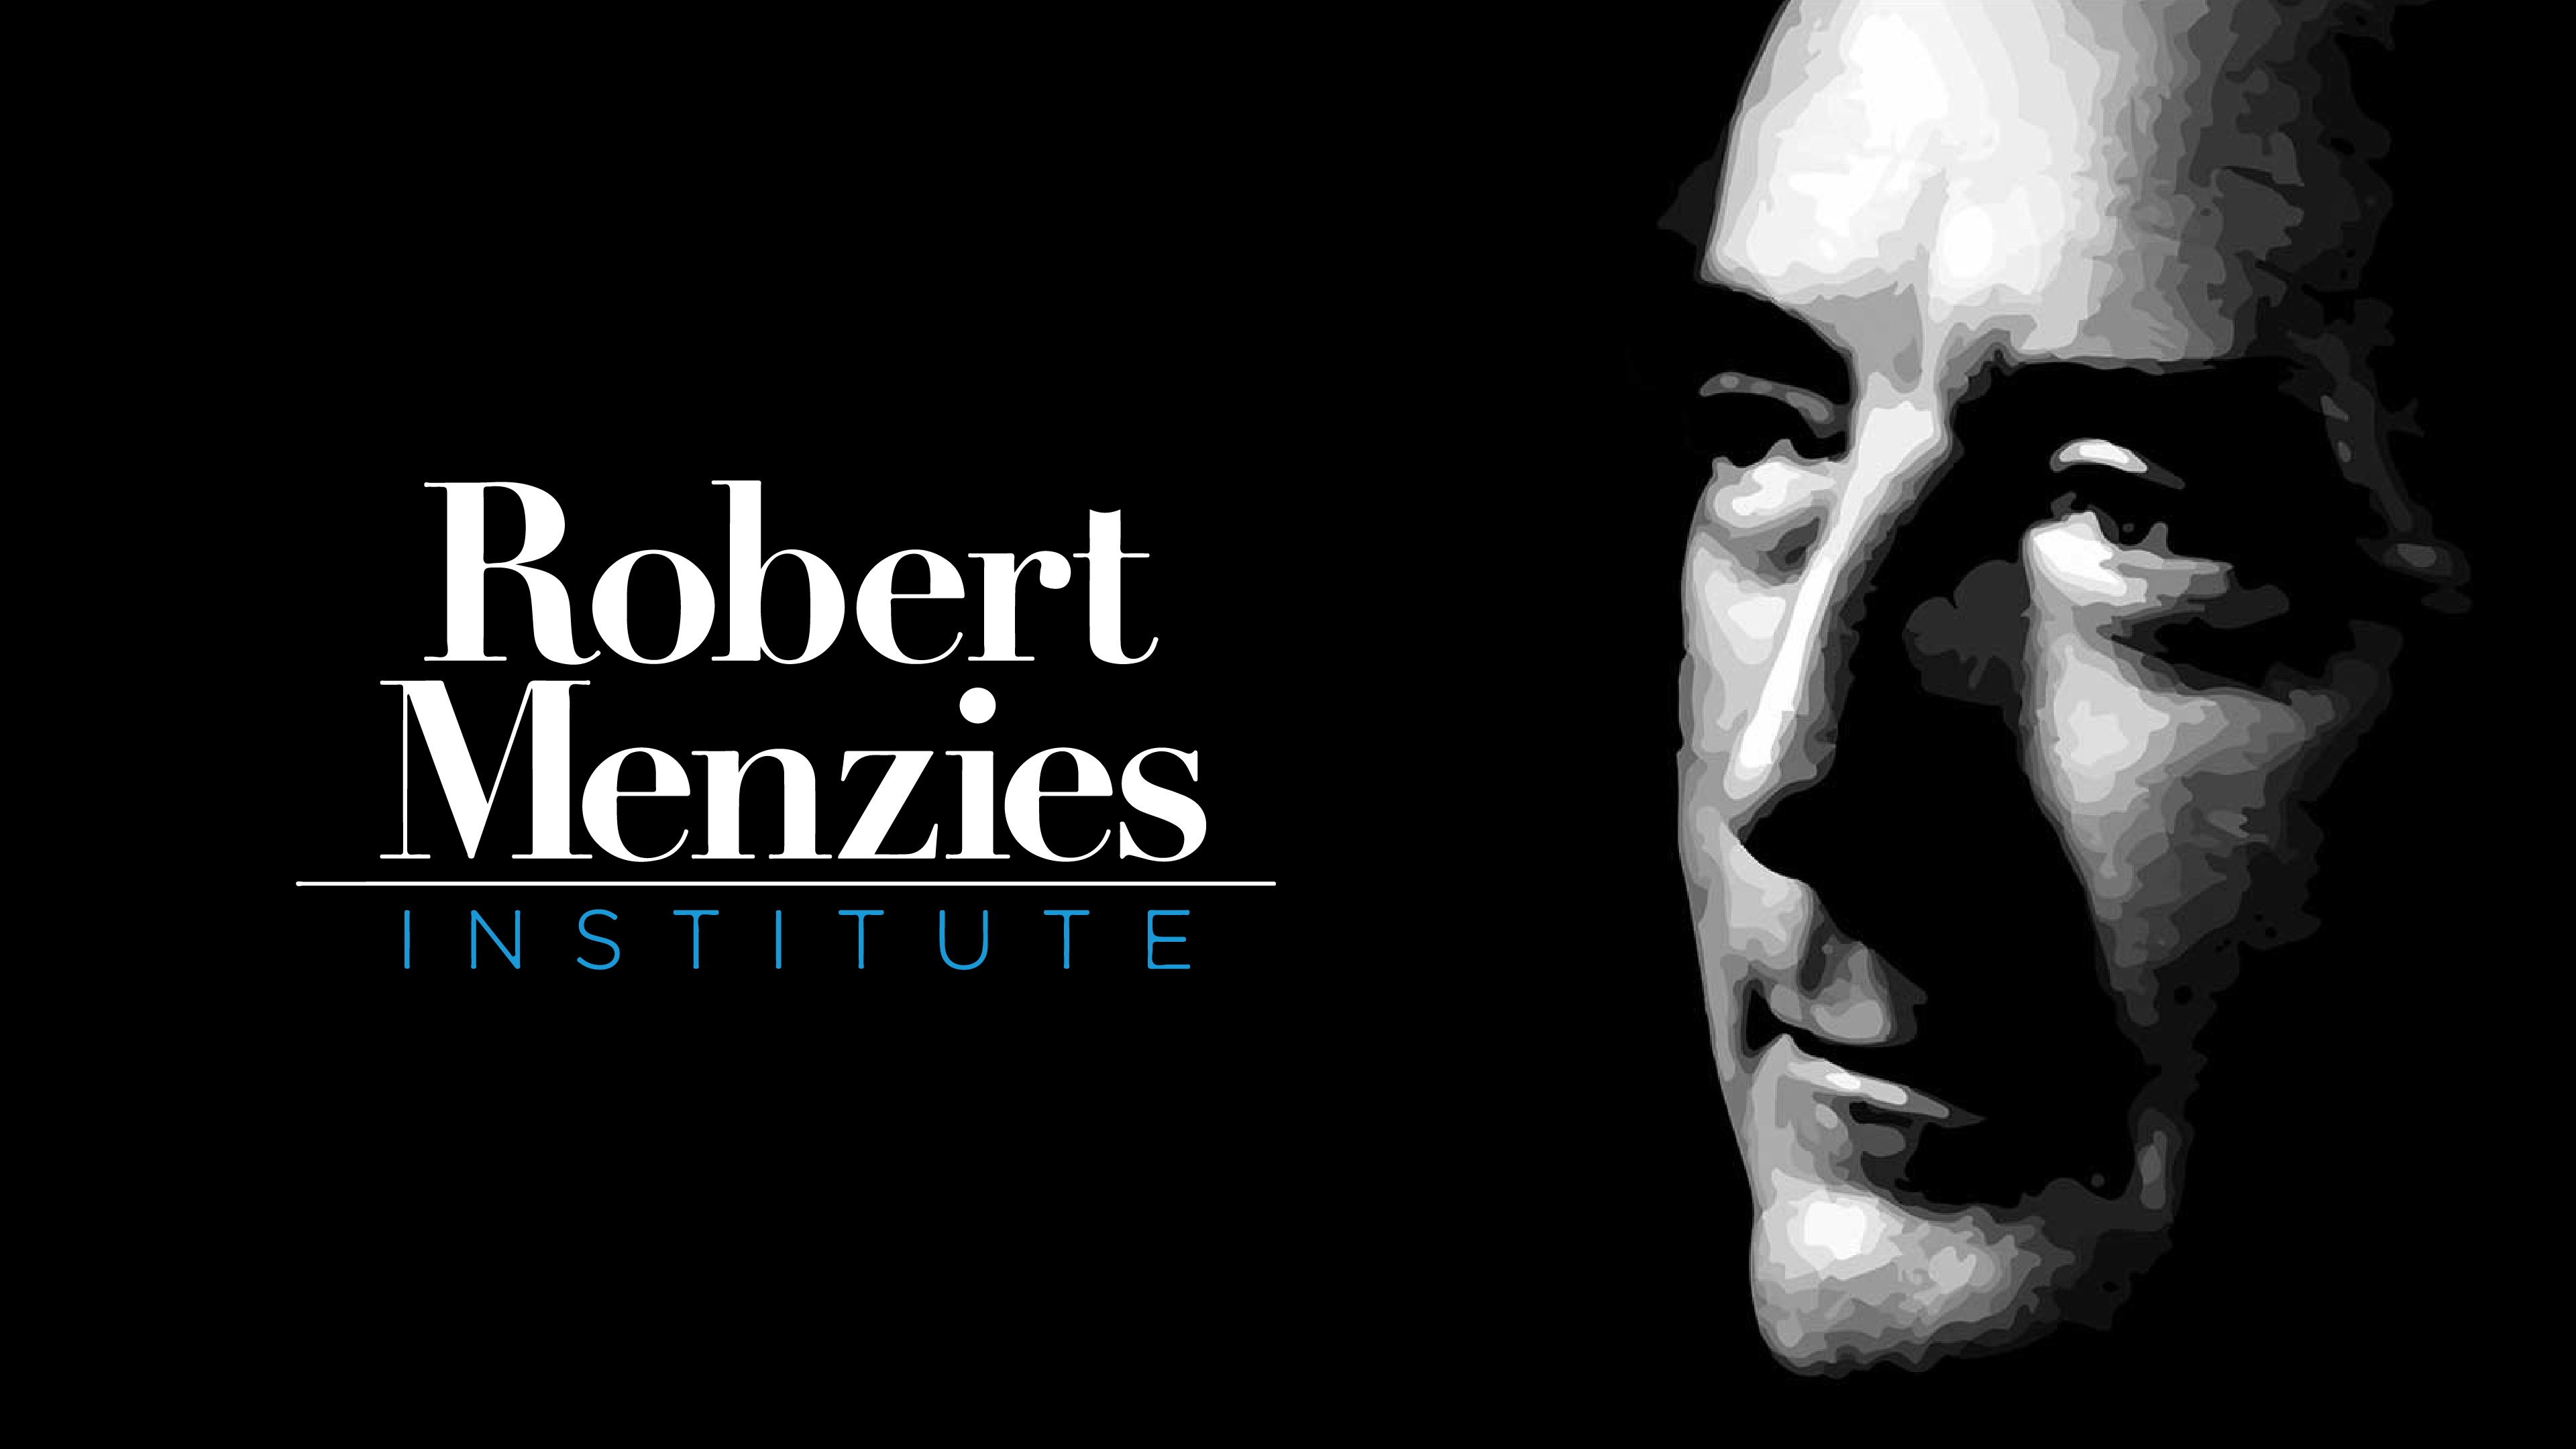 Robert Menzies Institute | 2023 Gala Dinner and Oration